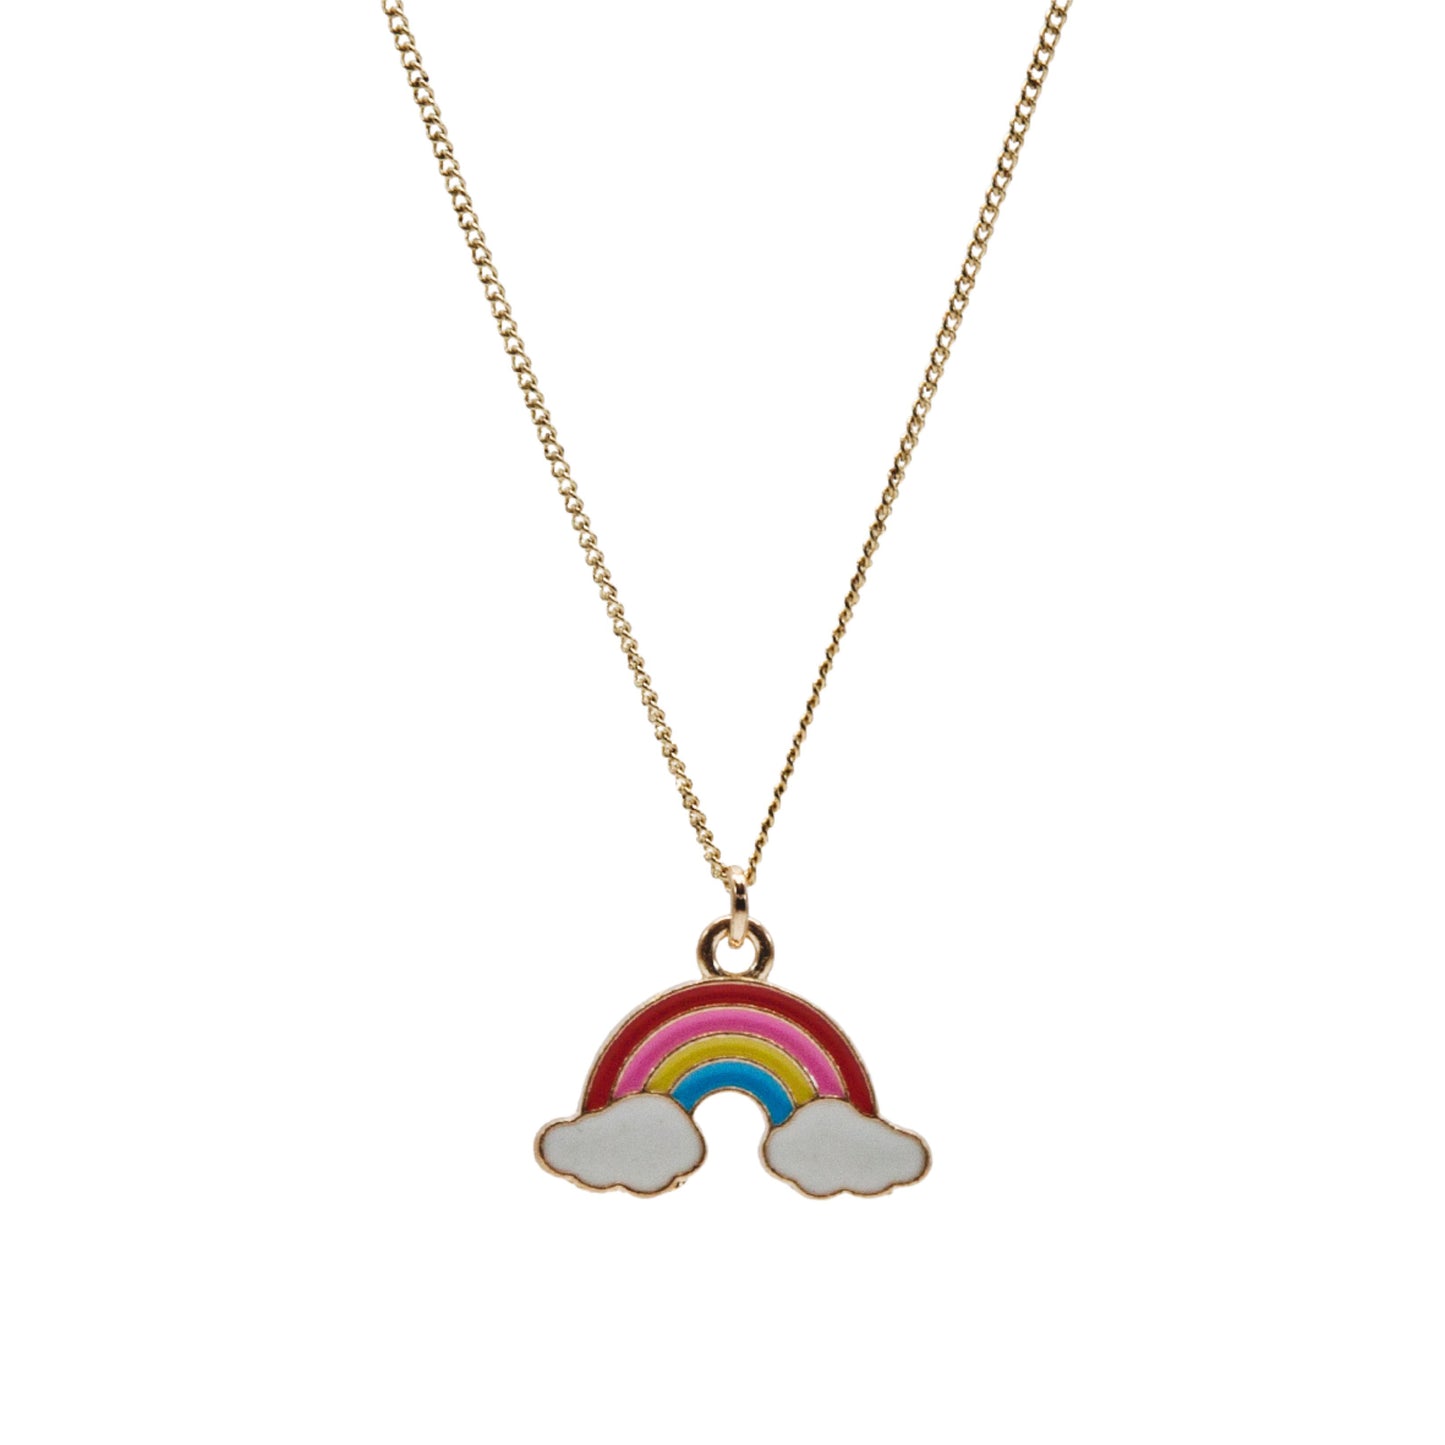 Gold Colourful Rainbow Necklace - Adjustabe Length